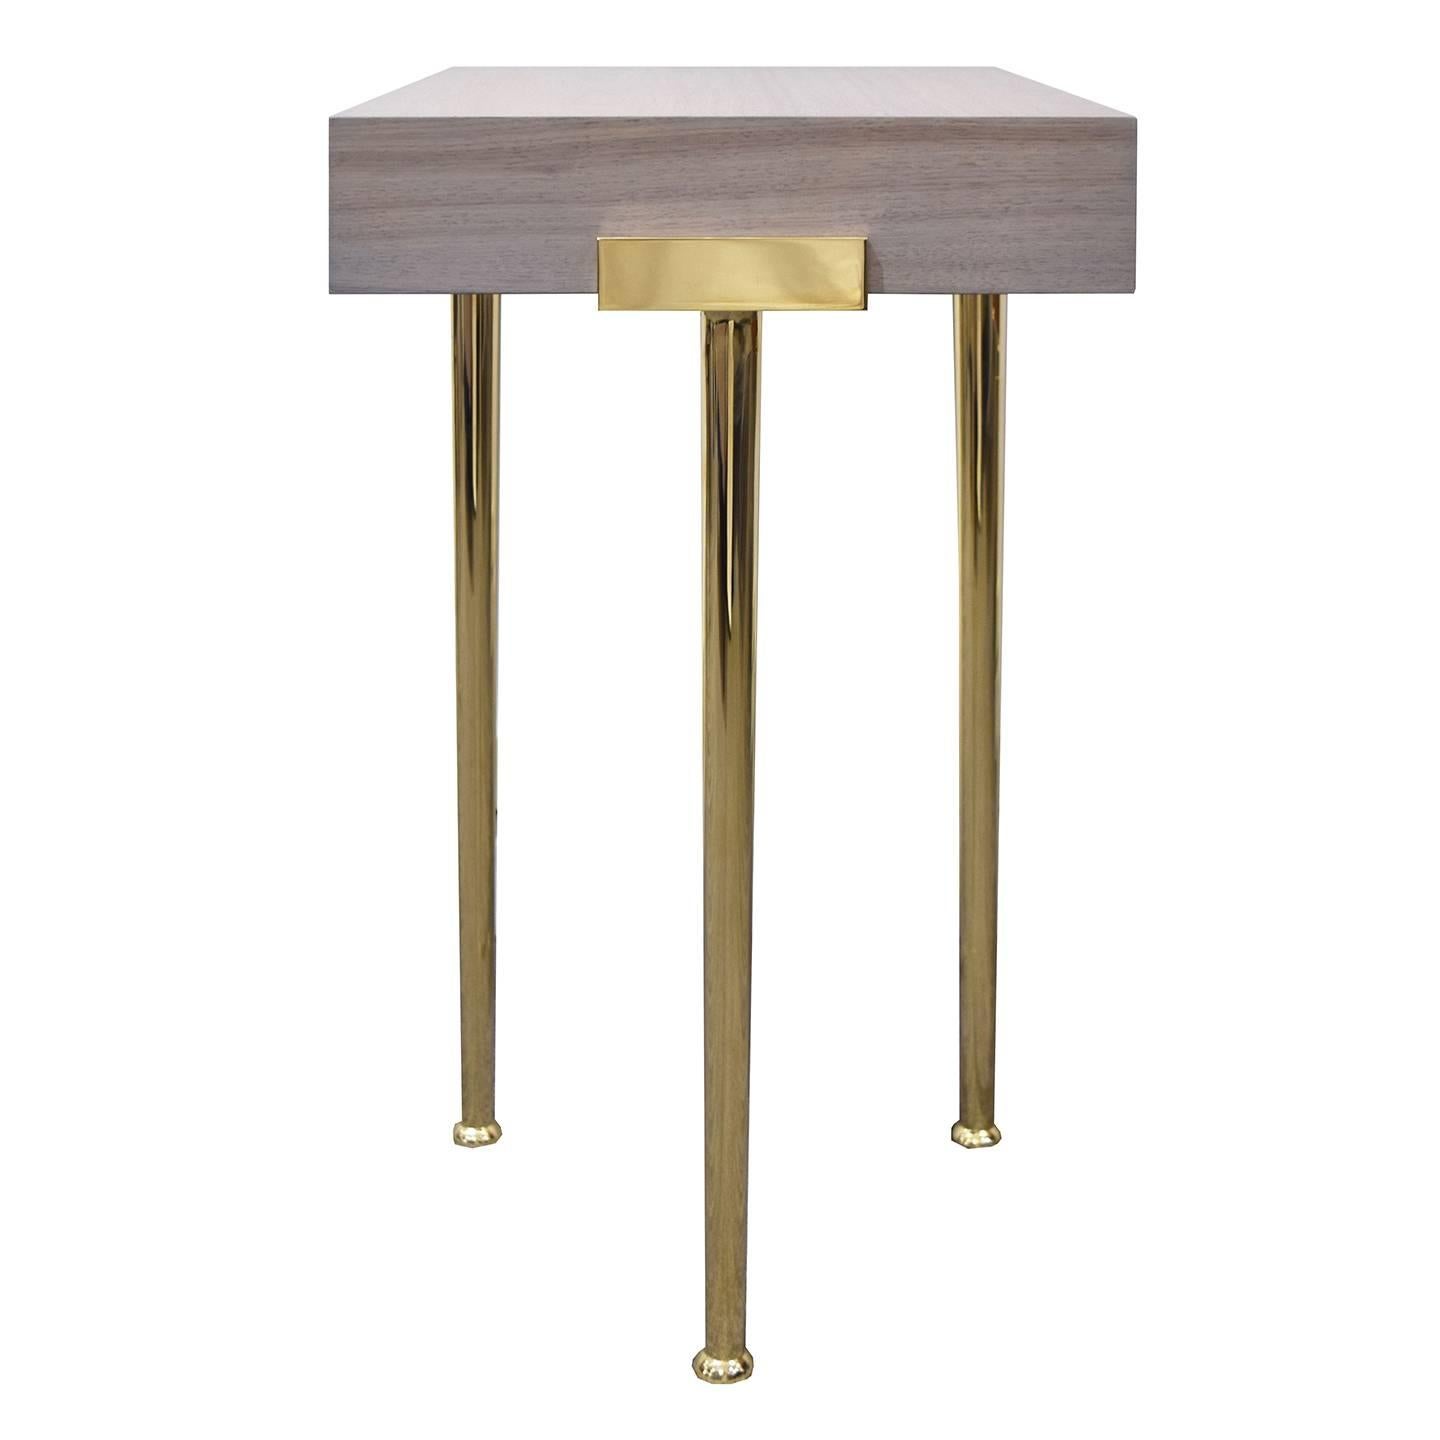 The Madison end table, designed by Irwin Feld Design for CF Modern, is a sophisticated stand for any living space. The table itself is made from a block of bleached walnut and stands on four stylish Madison legs, equipped with polished brass lips